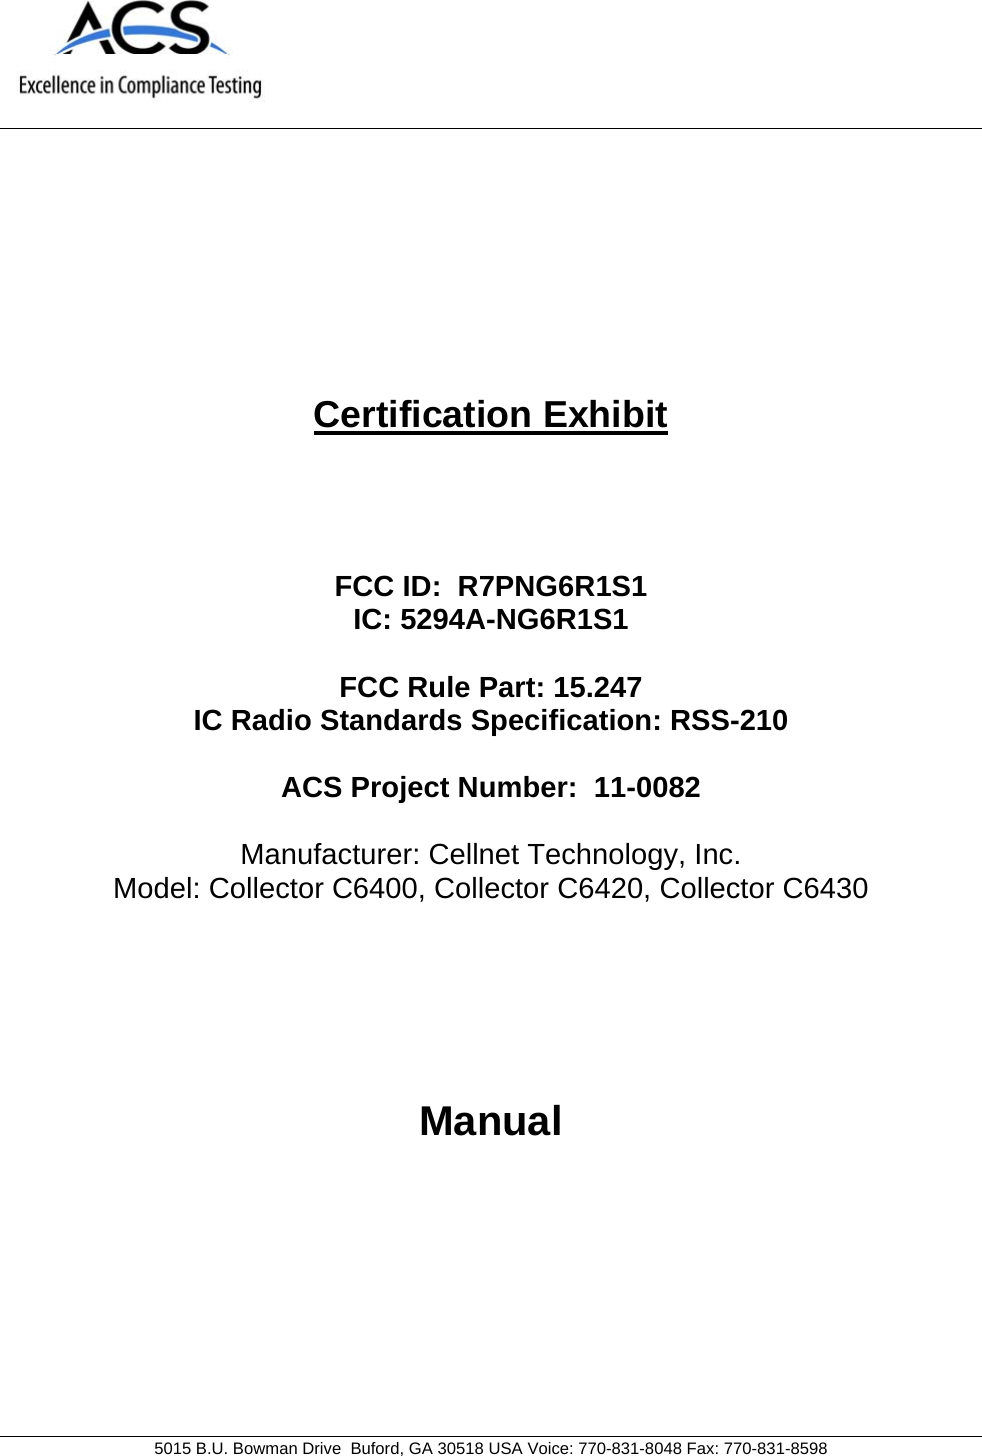     5015 B.U. Bowman Drive  Buford, GA 30518 USA Voice: 770-831-8048 Fax: 770-831-8598   Certification Exhibit     FCC ID:  R7PNG6R1S1 IC: 5294A-NG6R1S1  FCC Rule Part: 15.247 IC Radio Standards Specification: RSS-210  ACS Project Number:  11-0082   Manufacturer: Cellnet Technology, Inc. Model: Collector C6400, Collector C6420, Collector C6430     Manual  